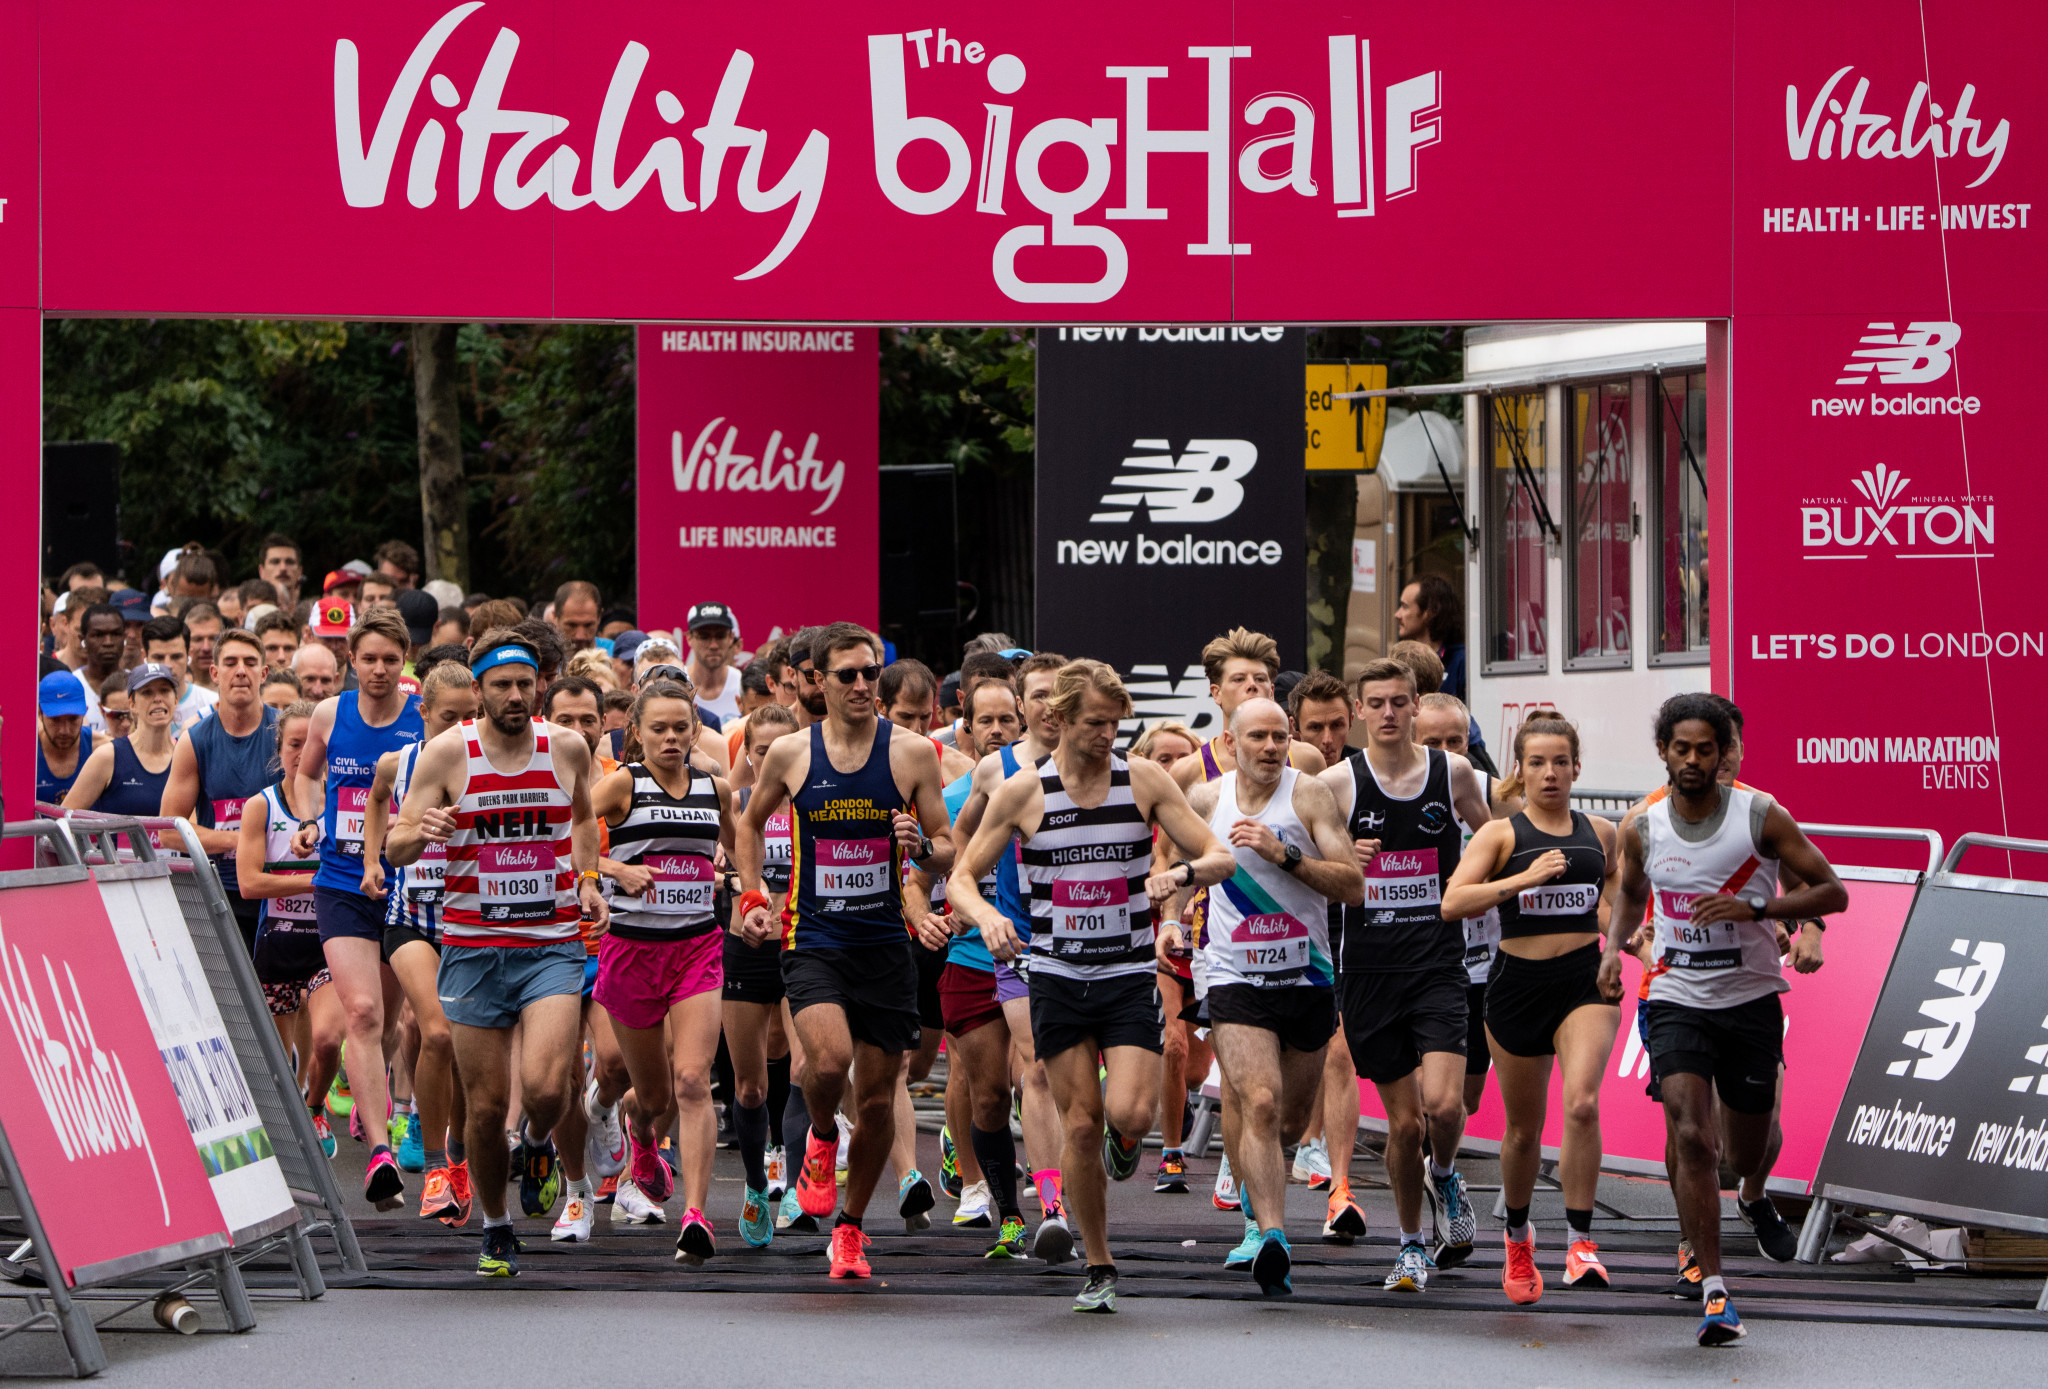 The Big Half in London attracts 10,000 runners, COVID19